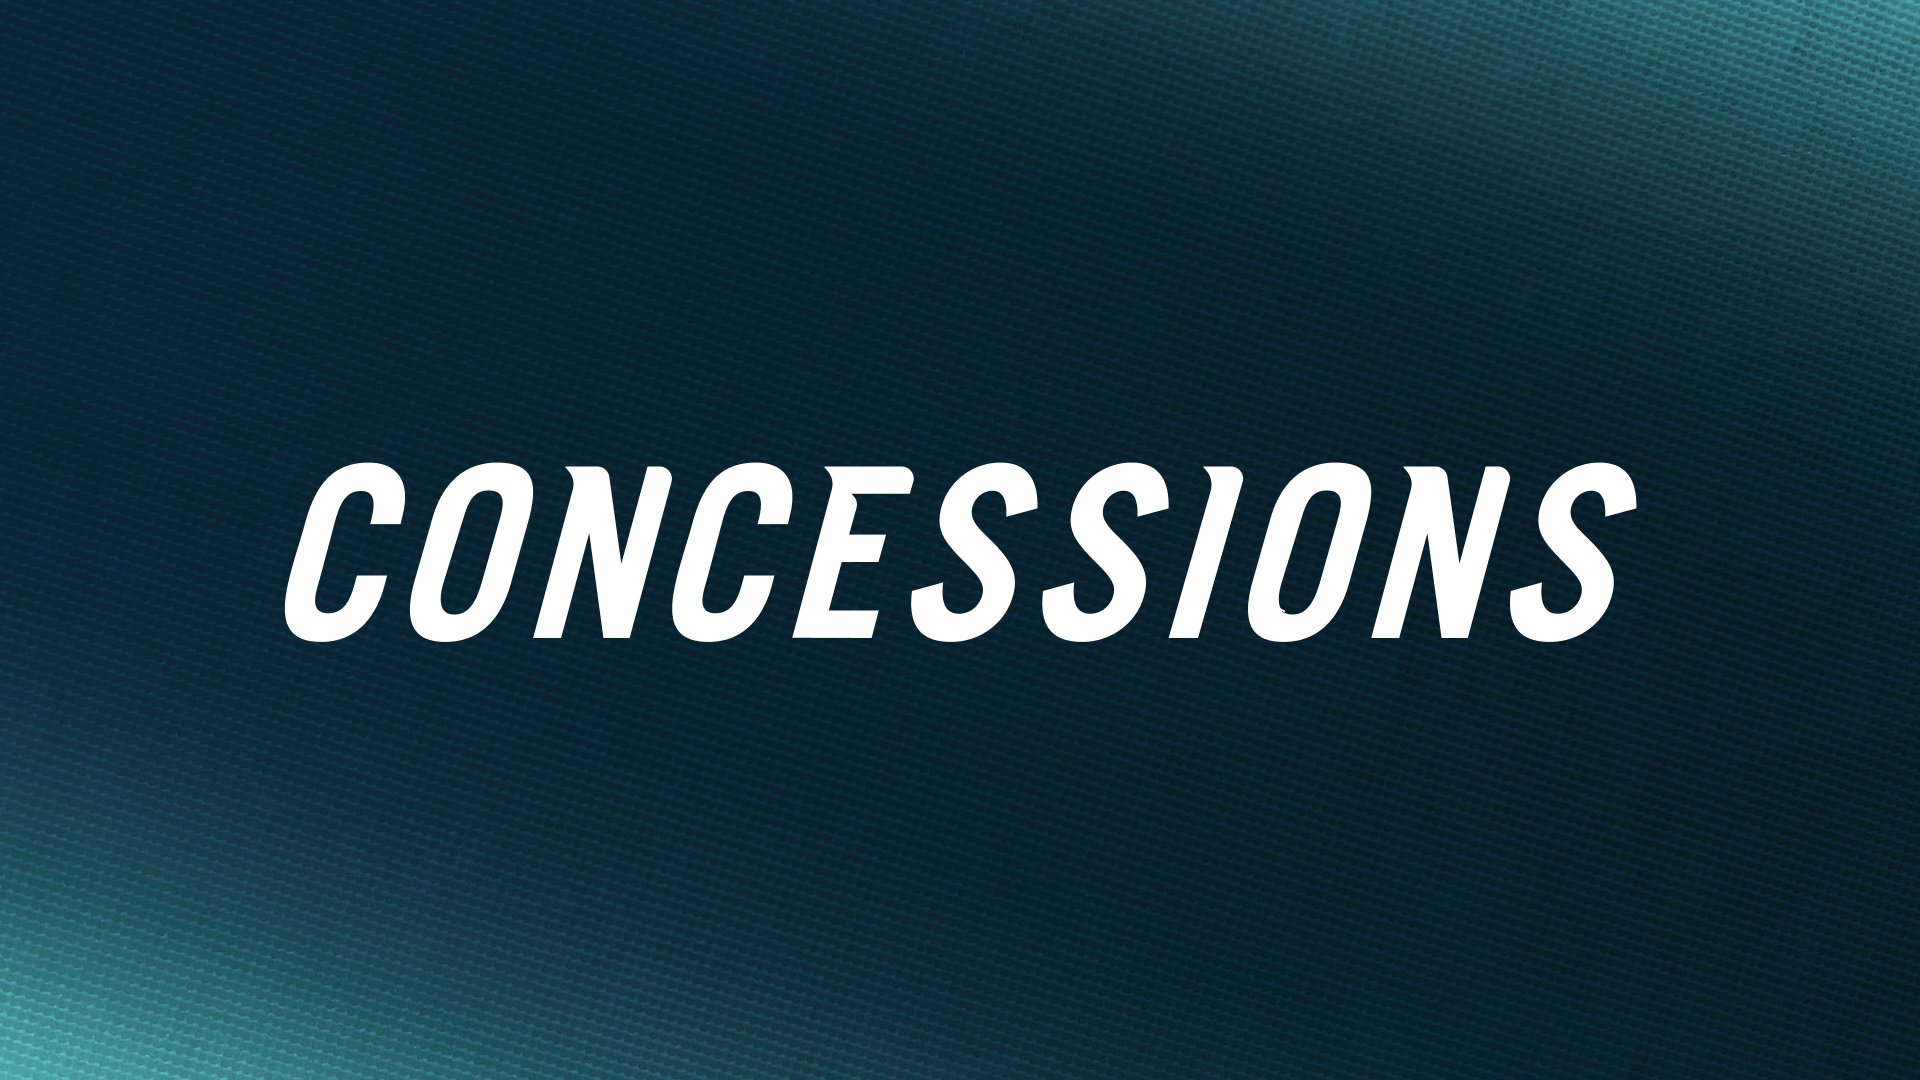 A graphic with the text "Concessions" on a navy background.